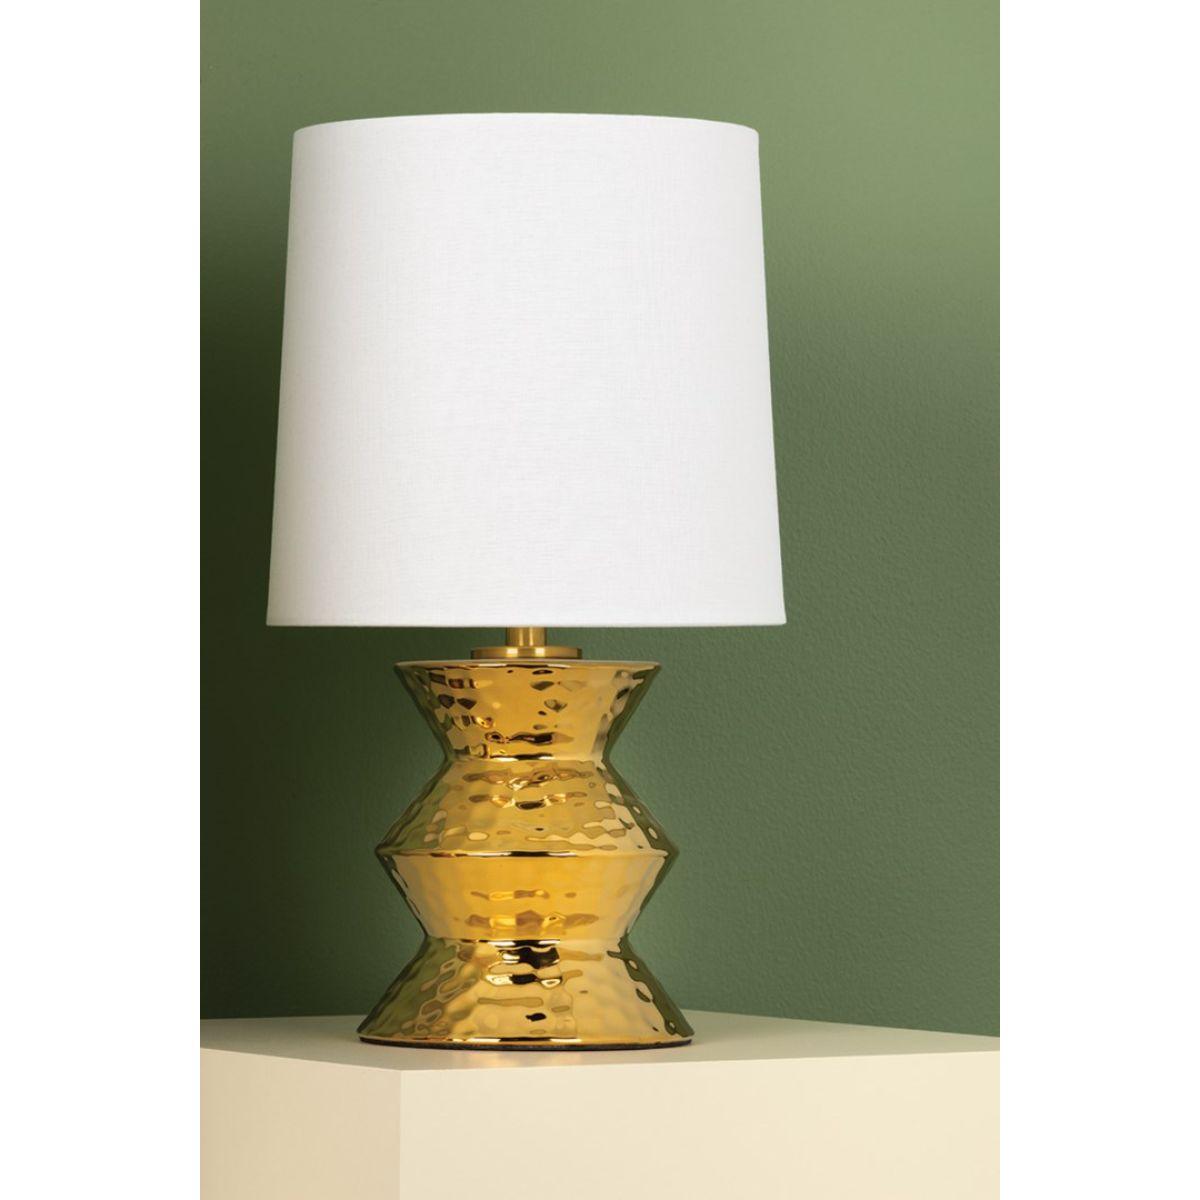 Zoe 17 inches Table Lamp Aged Brass Ceramic Gold Finish